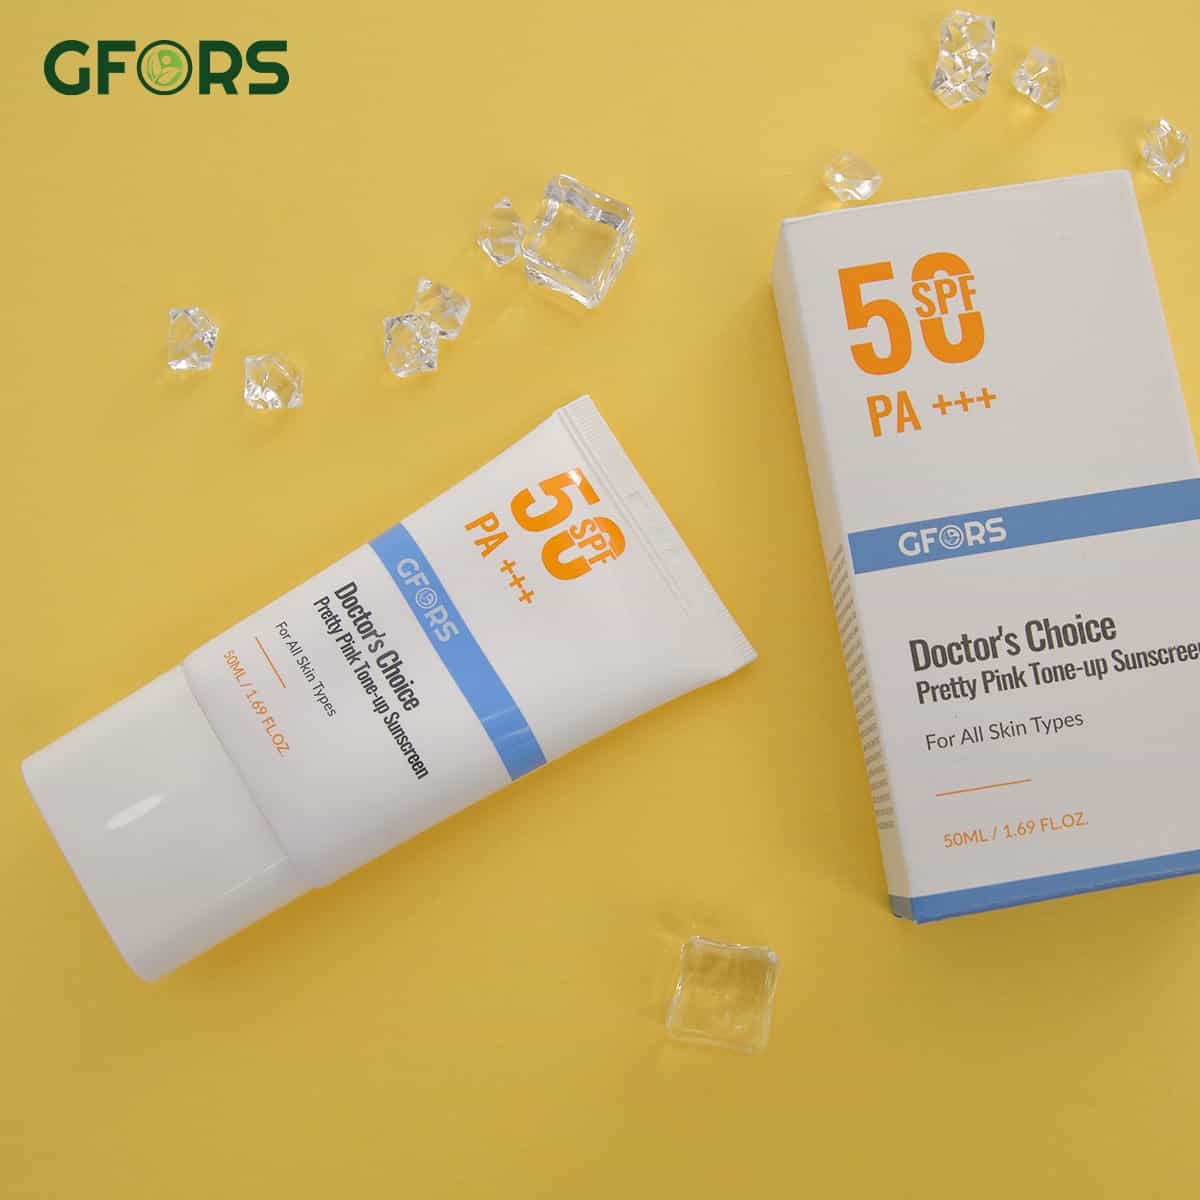 GFORS Doctors Choice Pretty Pink Tone Up Sunscreen